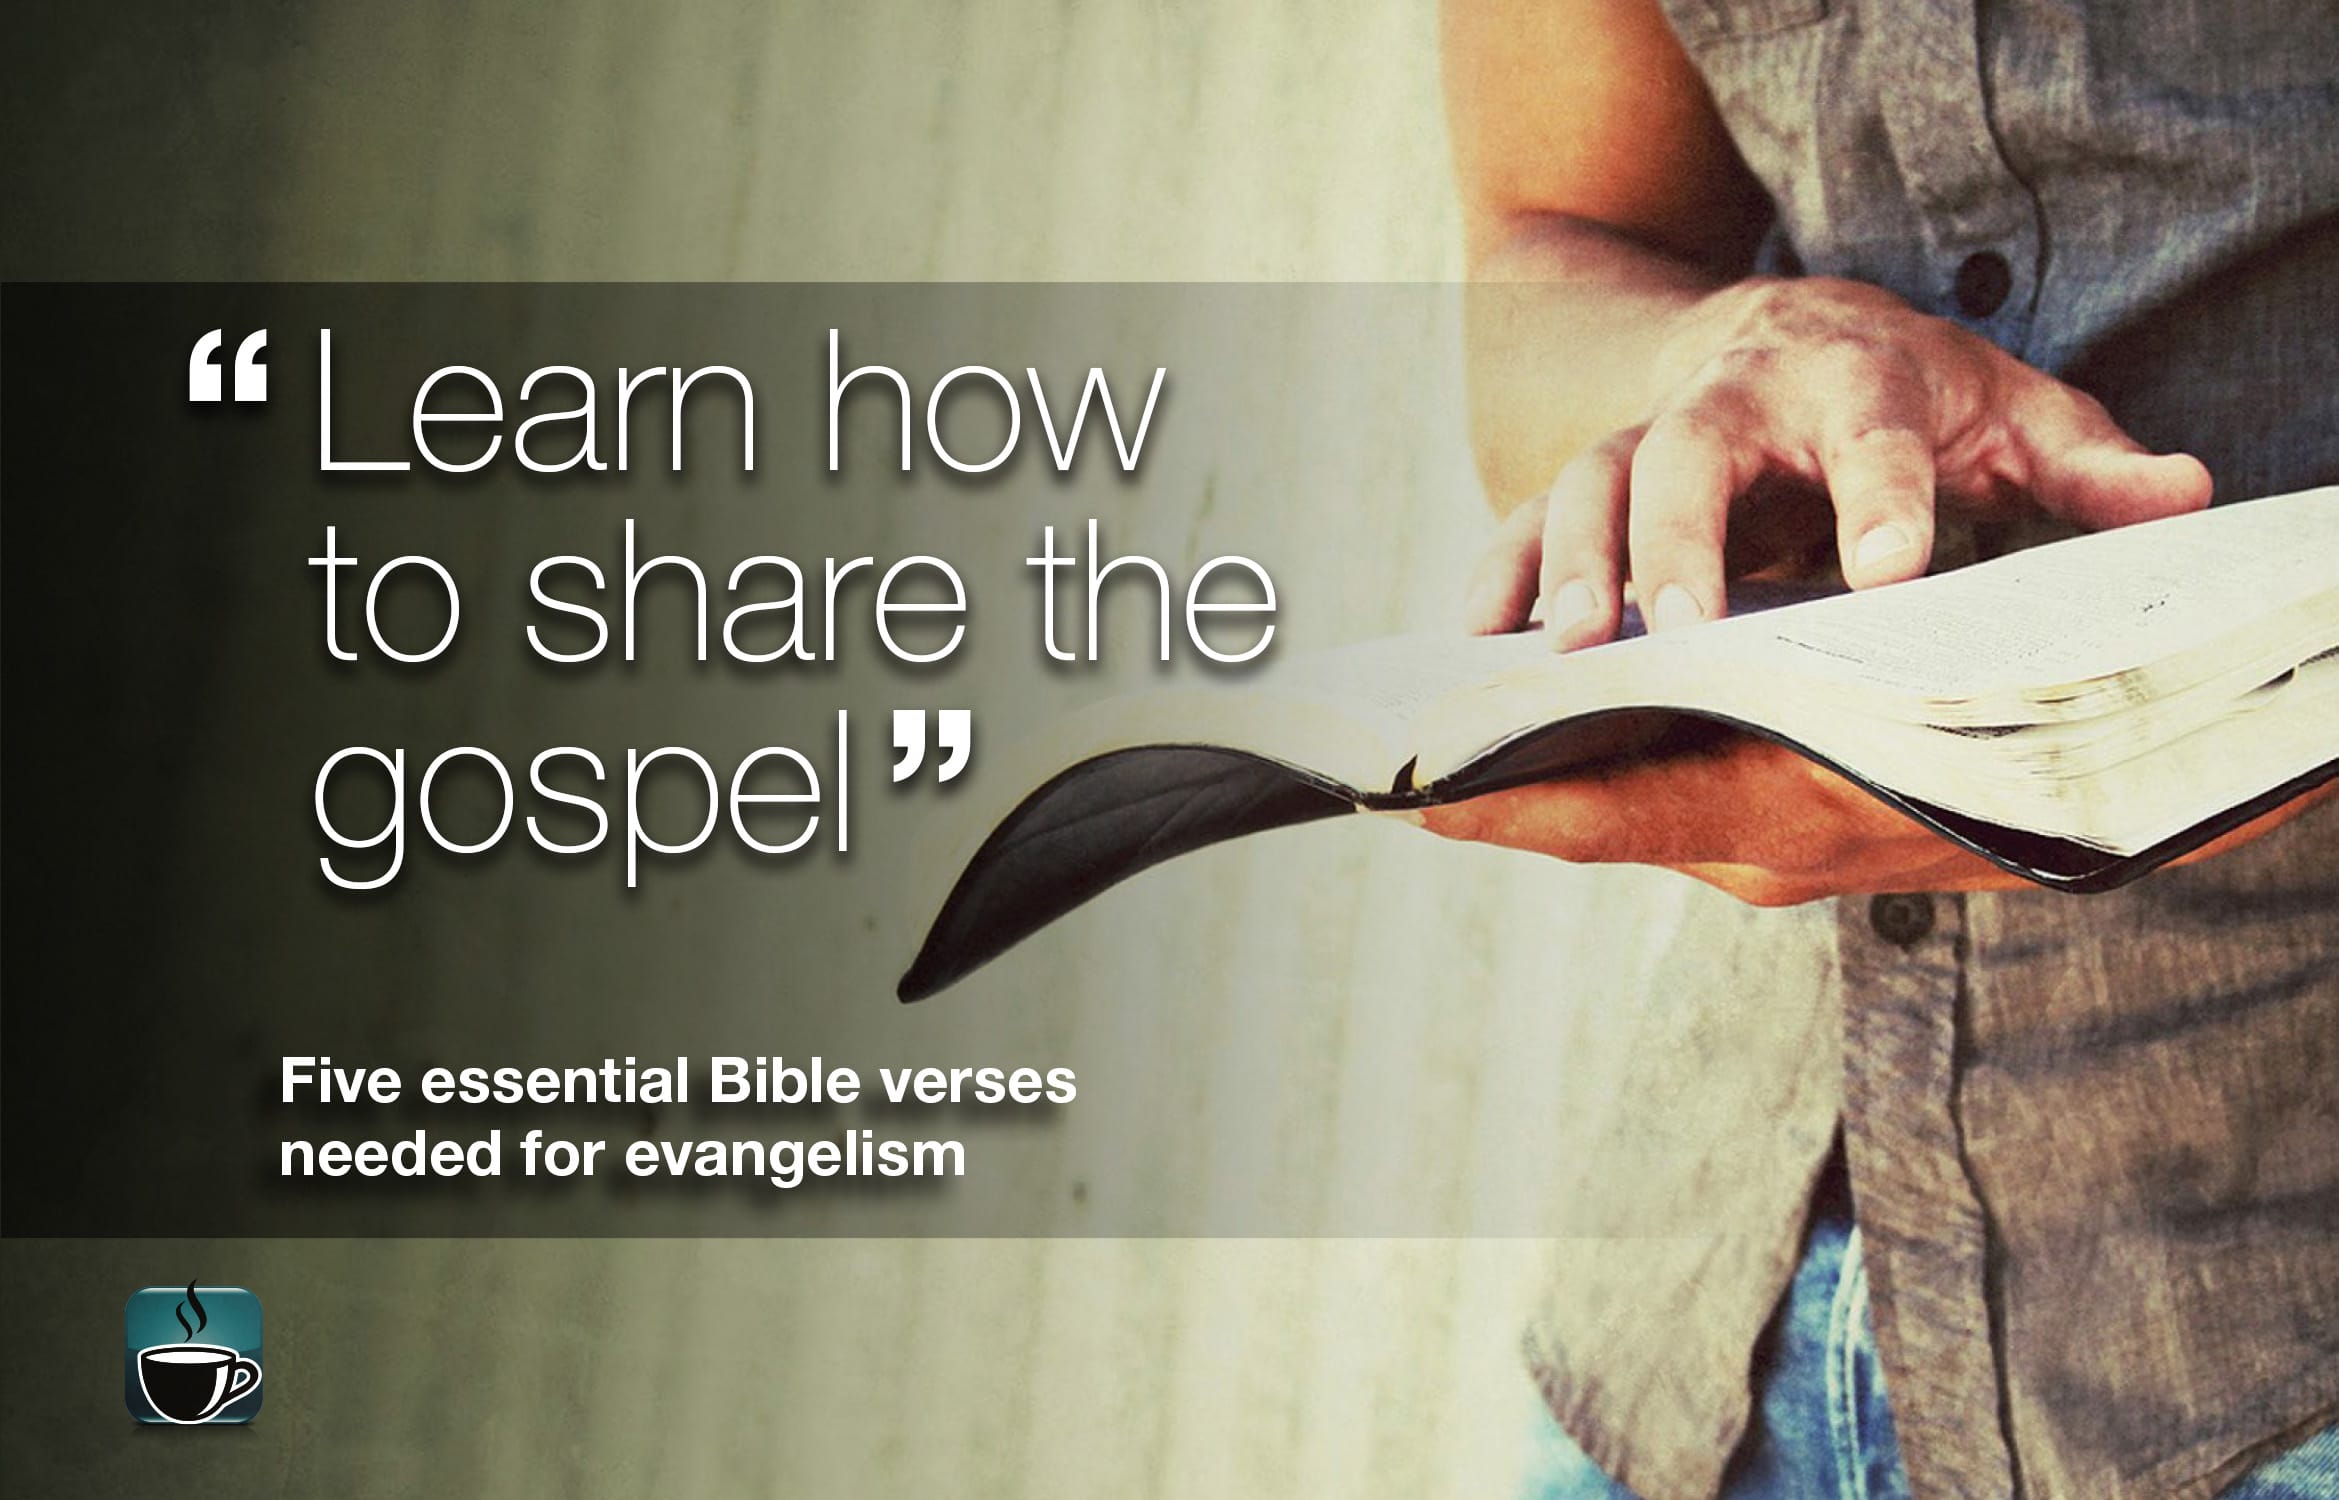 Learn how to share the gospel, how to share the gospel, share the gospel, the gospel, gospel